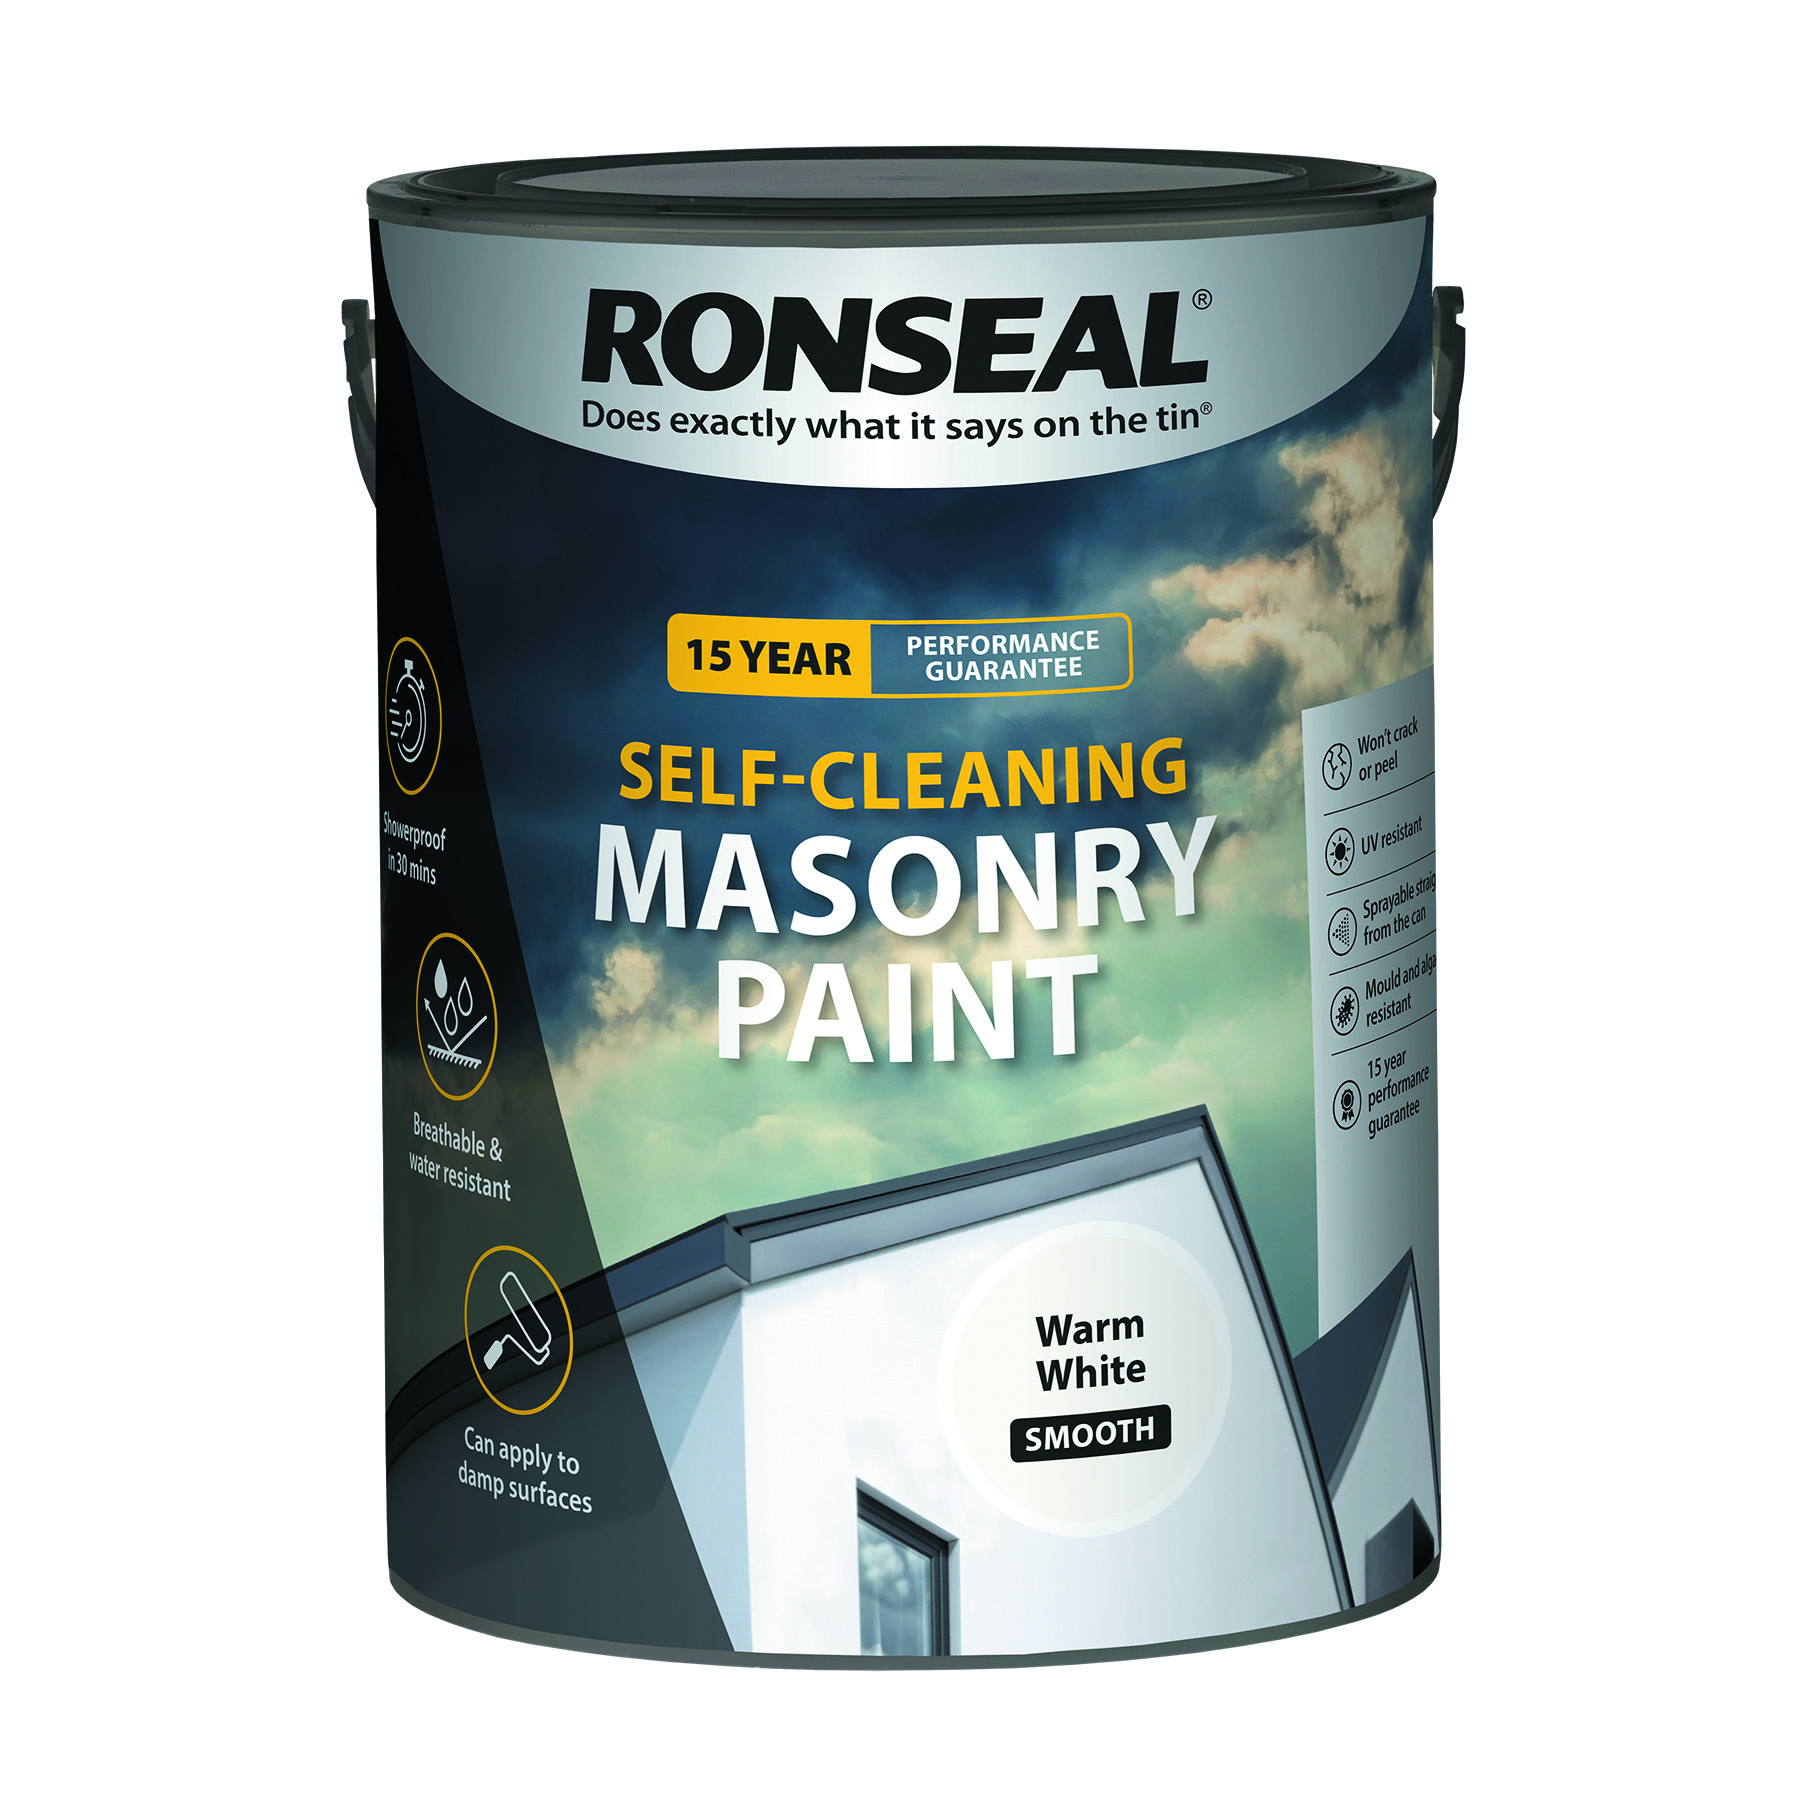 Ronseal Self-cleaning Masonry Paint - Warm White - 5l